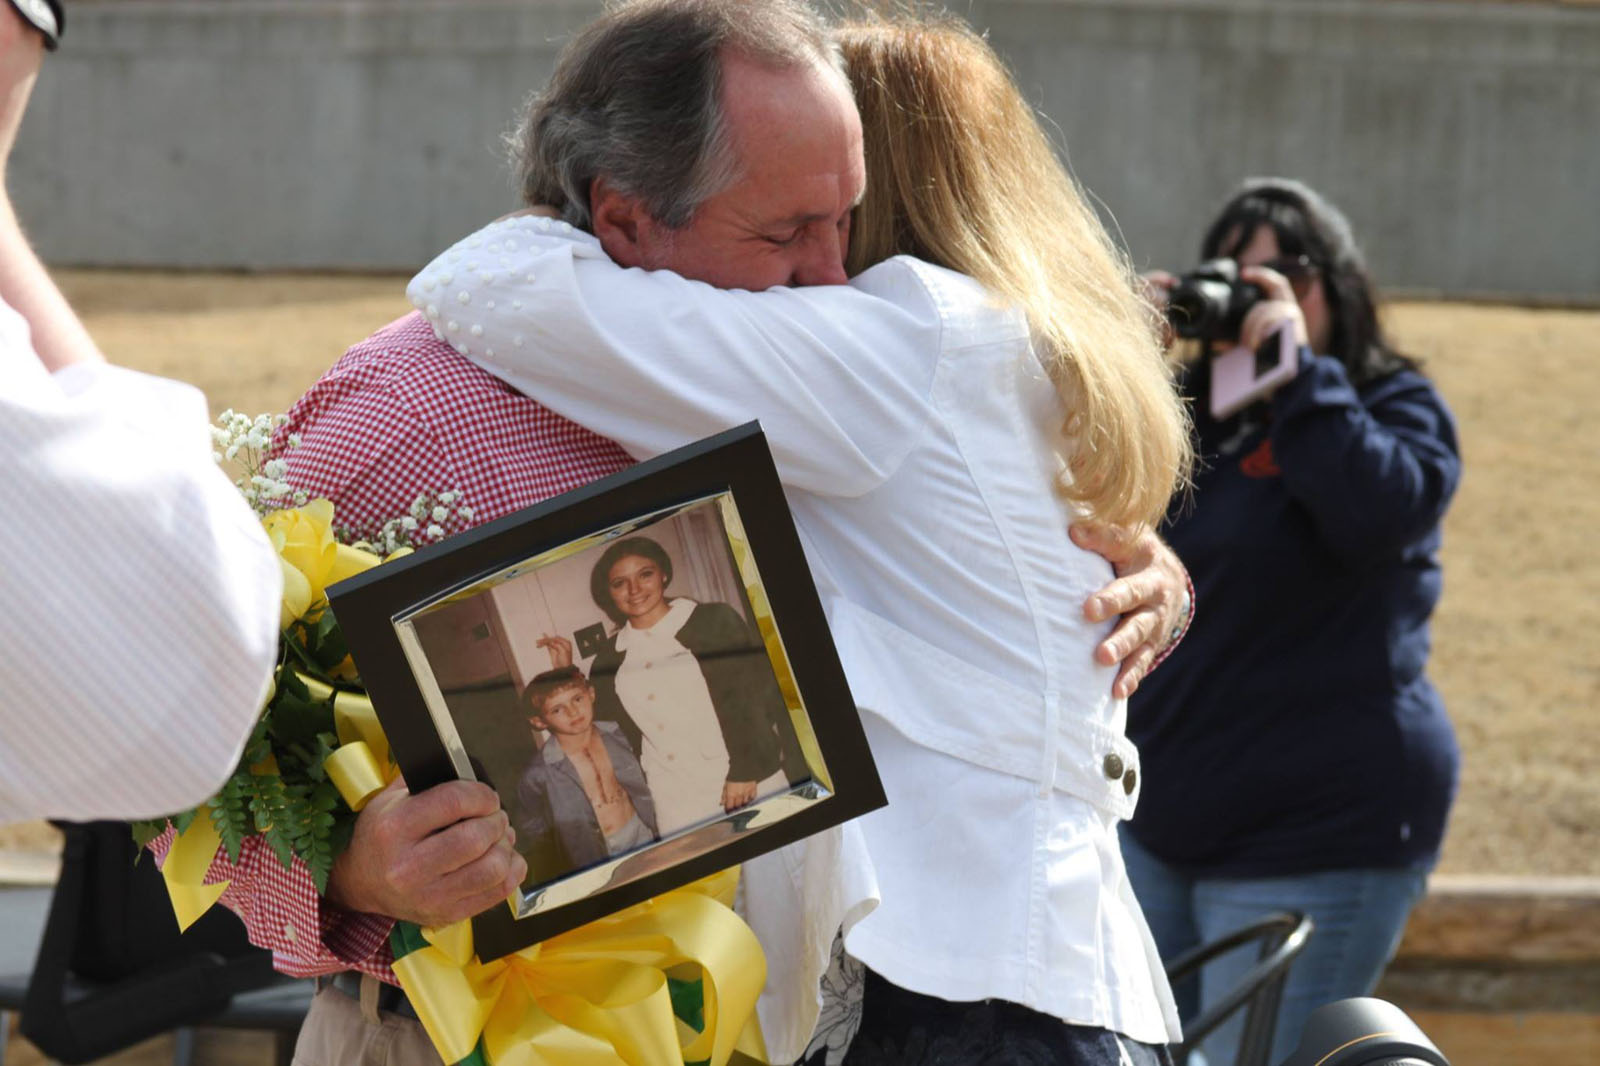 PHOTO: Gary Bentley was reunited with the nurse from his childhood more than 42 years later